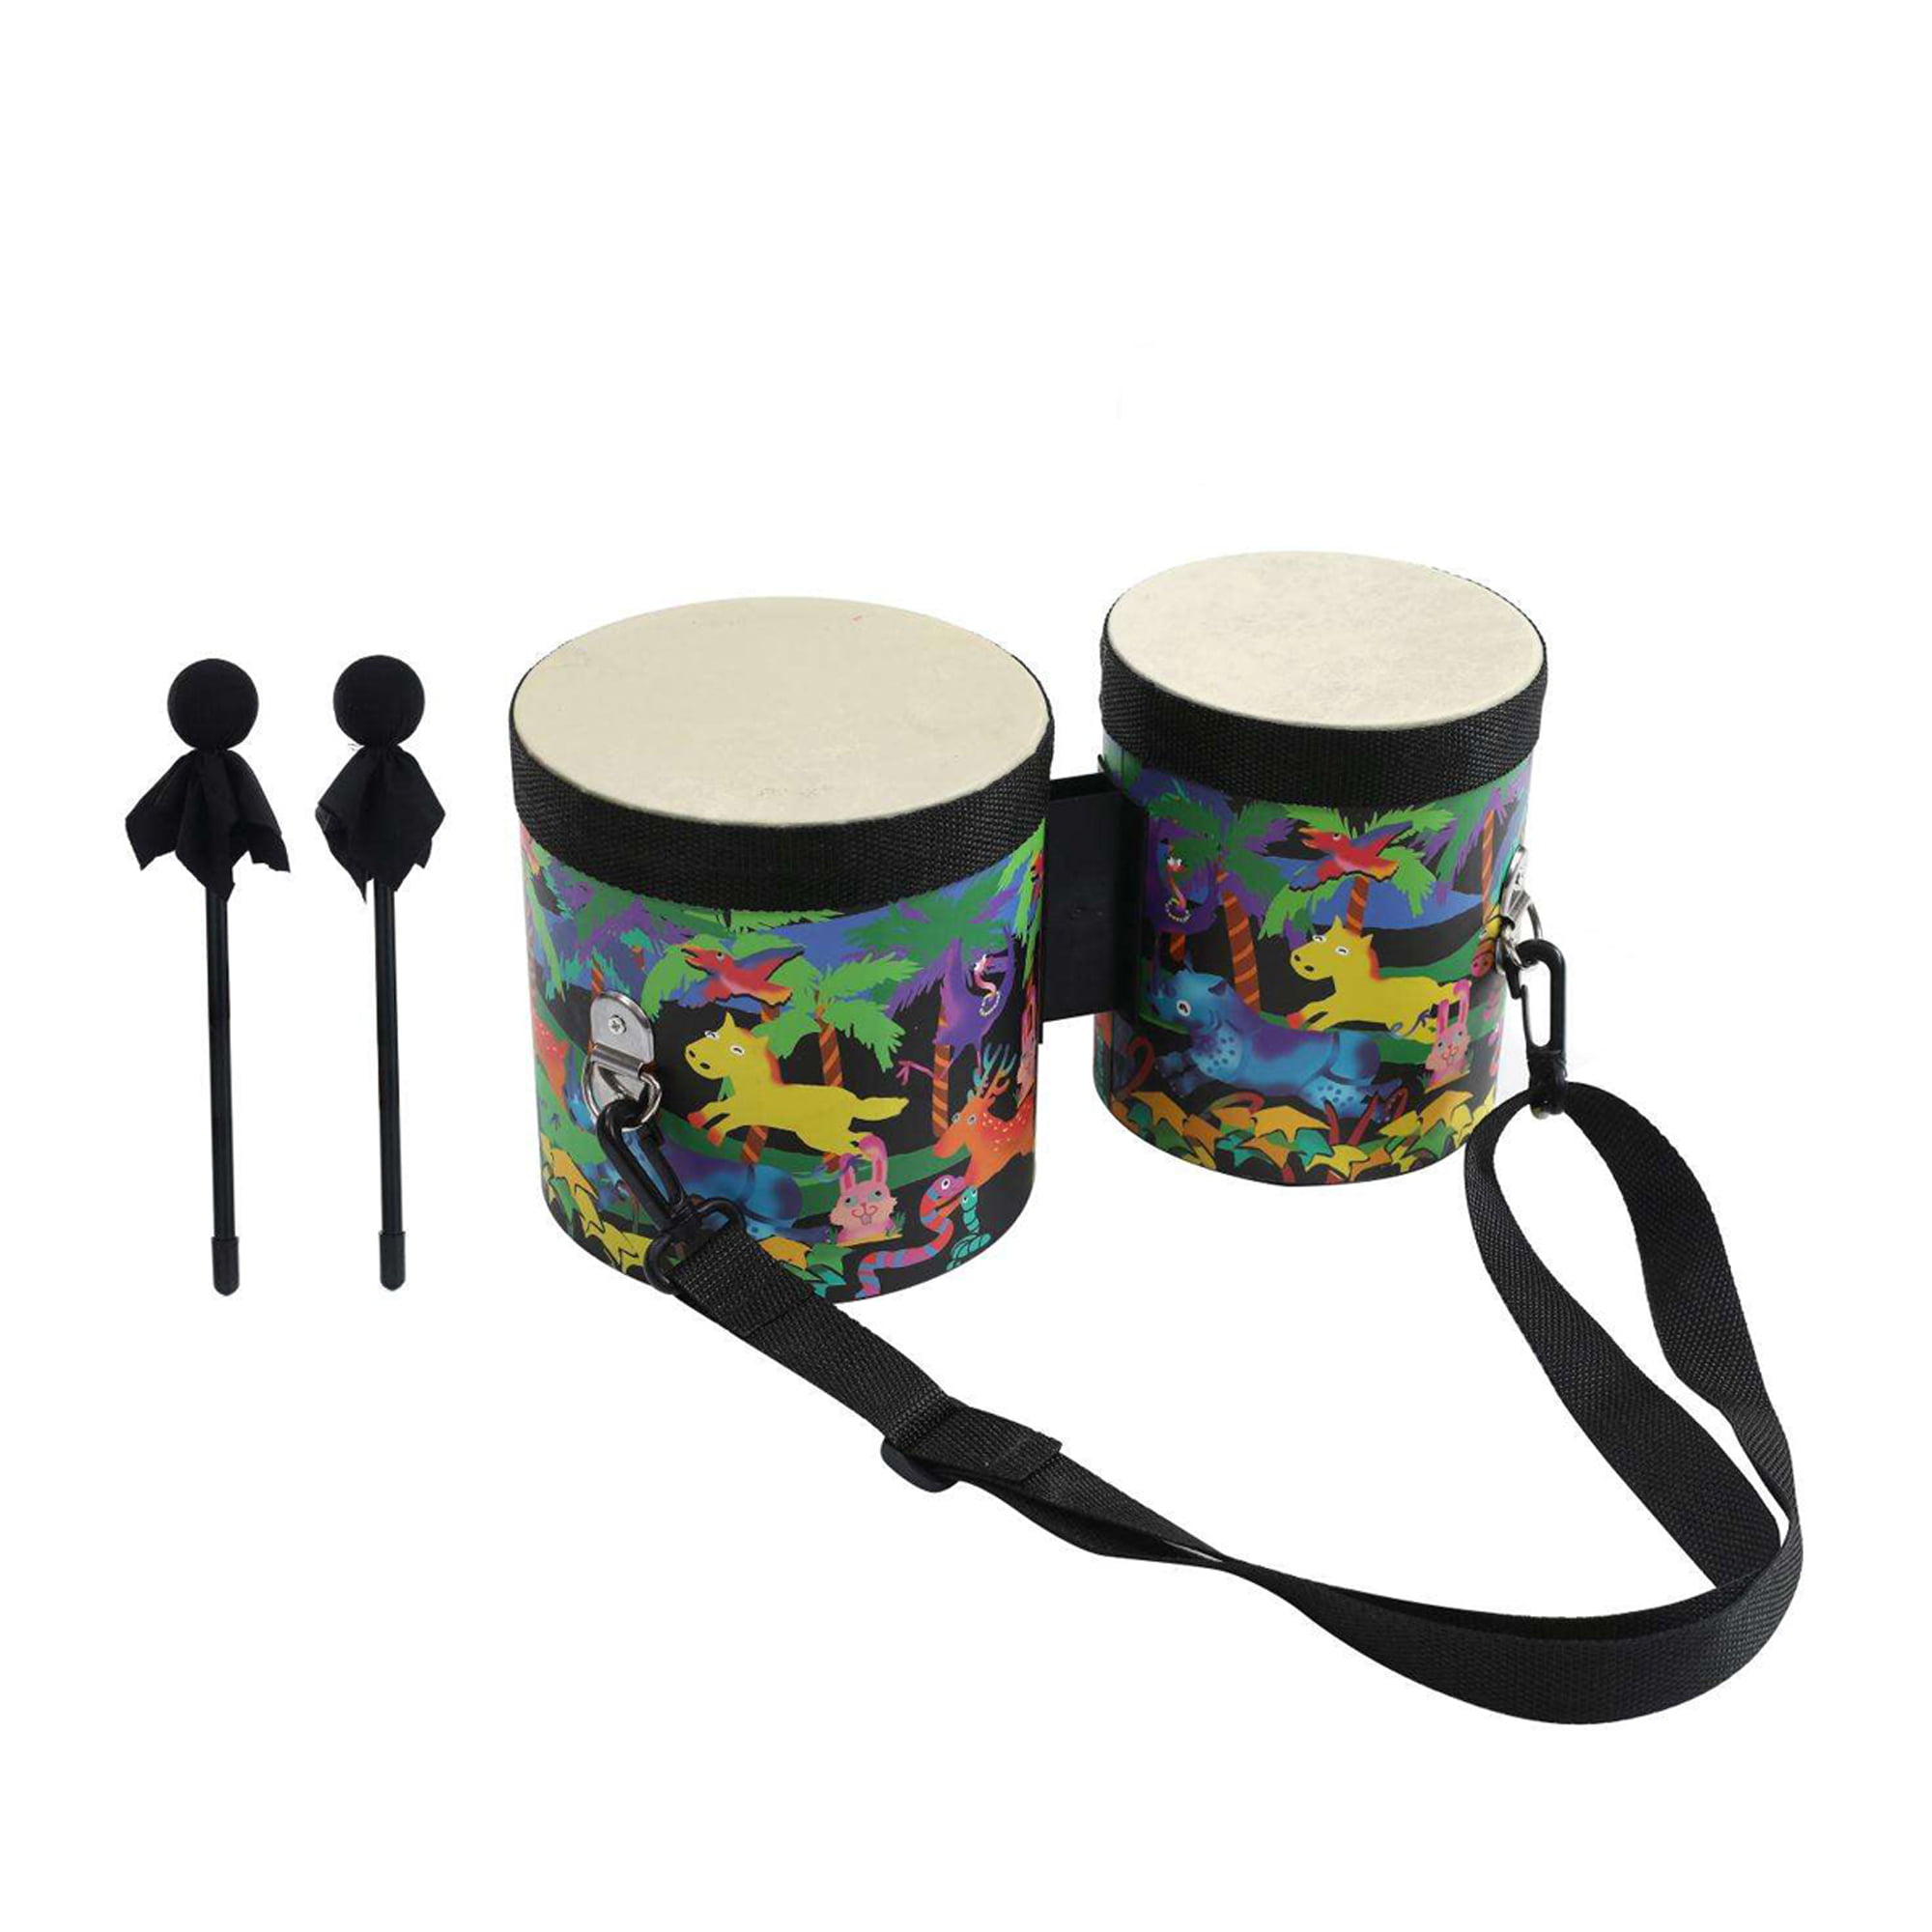 Rhythm Band Bongos Junior 6 in Dia RB1301 H x 5 in and 4-1/4 in